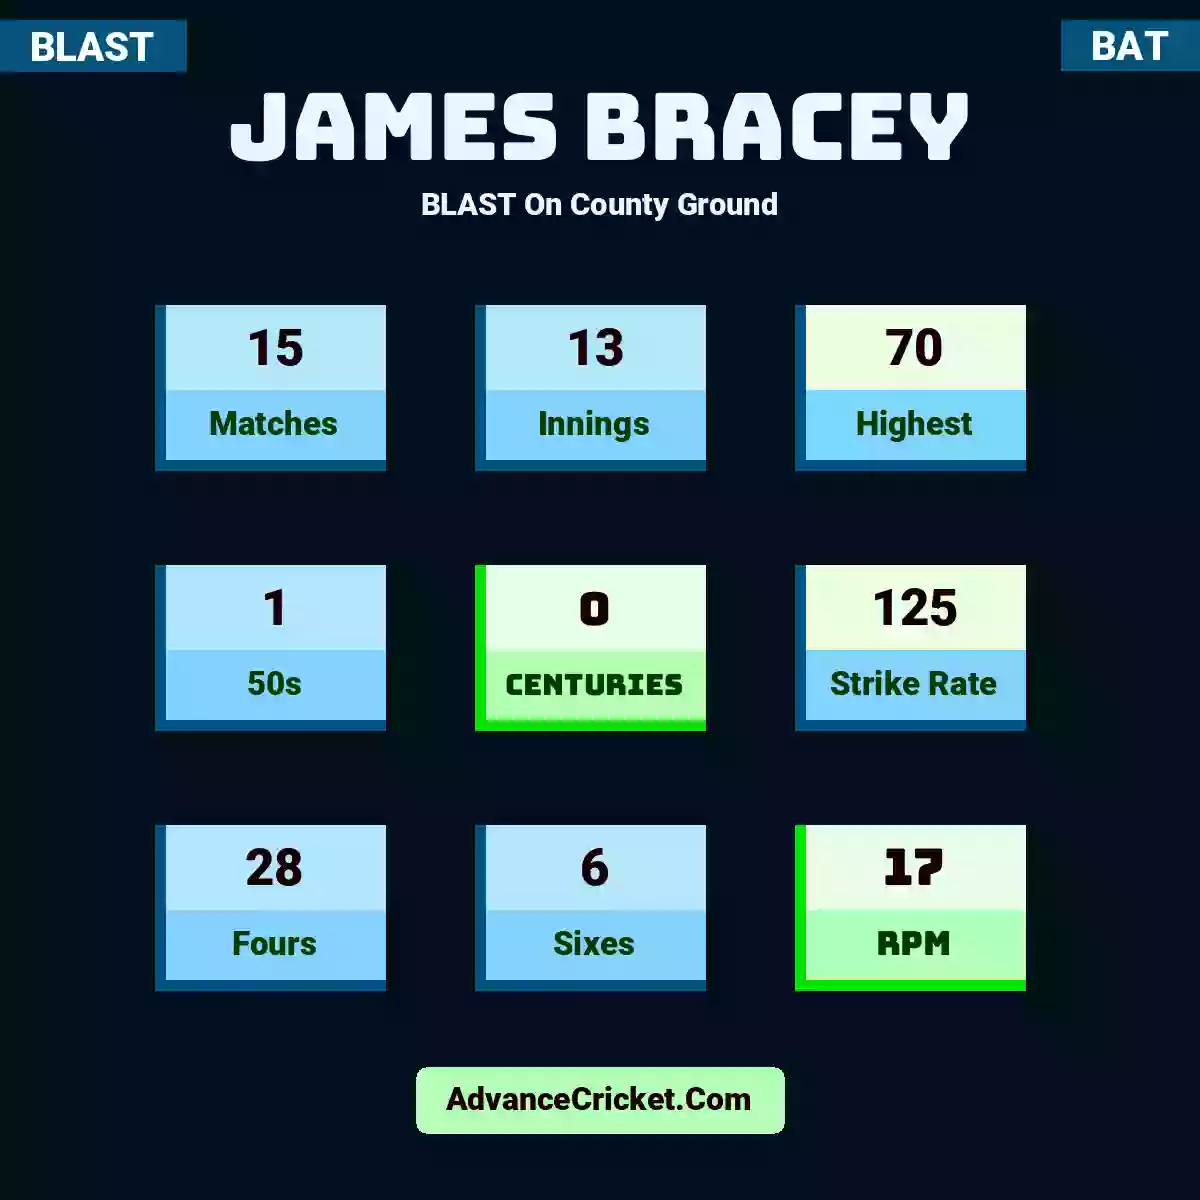 James Bracey BLAST  On County Ground, James Bracey played 15 matches, scored 70 runs as highest, 1 half-centuries, and 0 centuries, with a strike rate of 125. J.Bracey hit 28 fours and 6 sixes, with an RPM of 17.